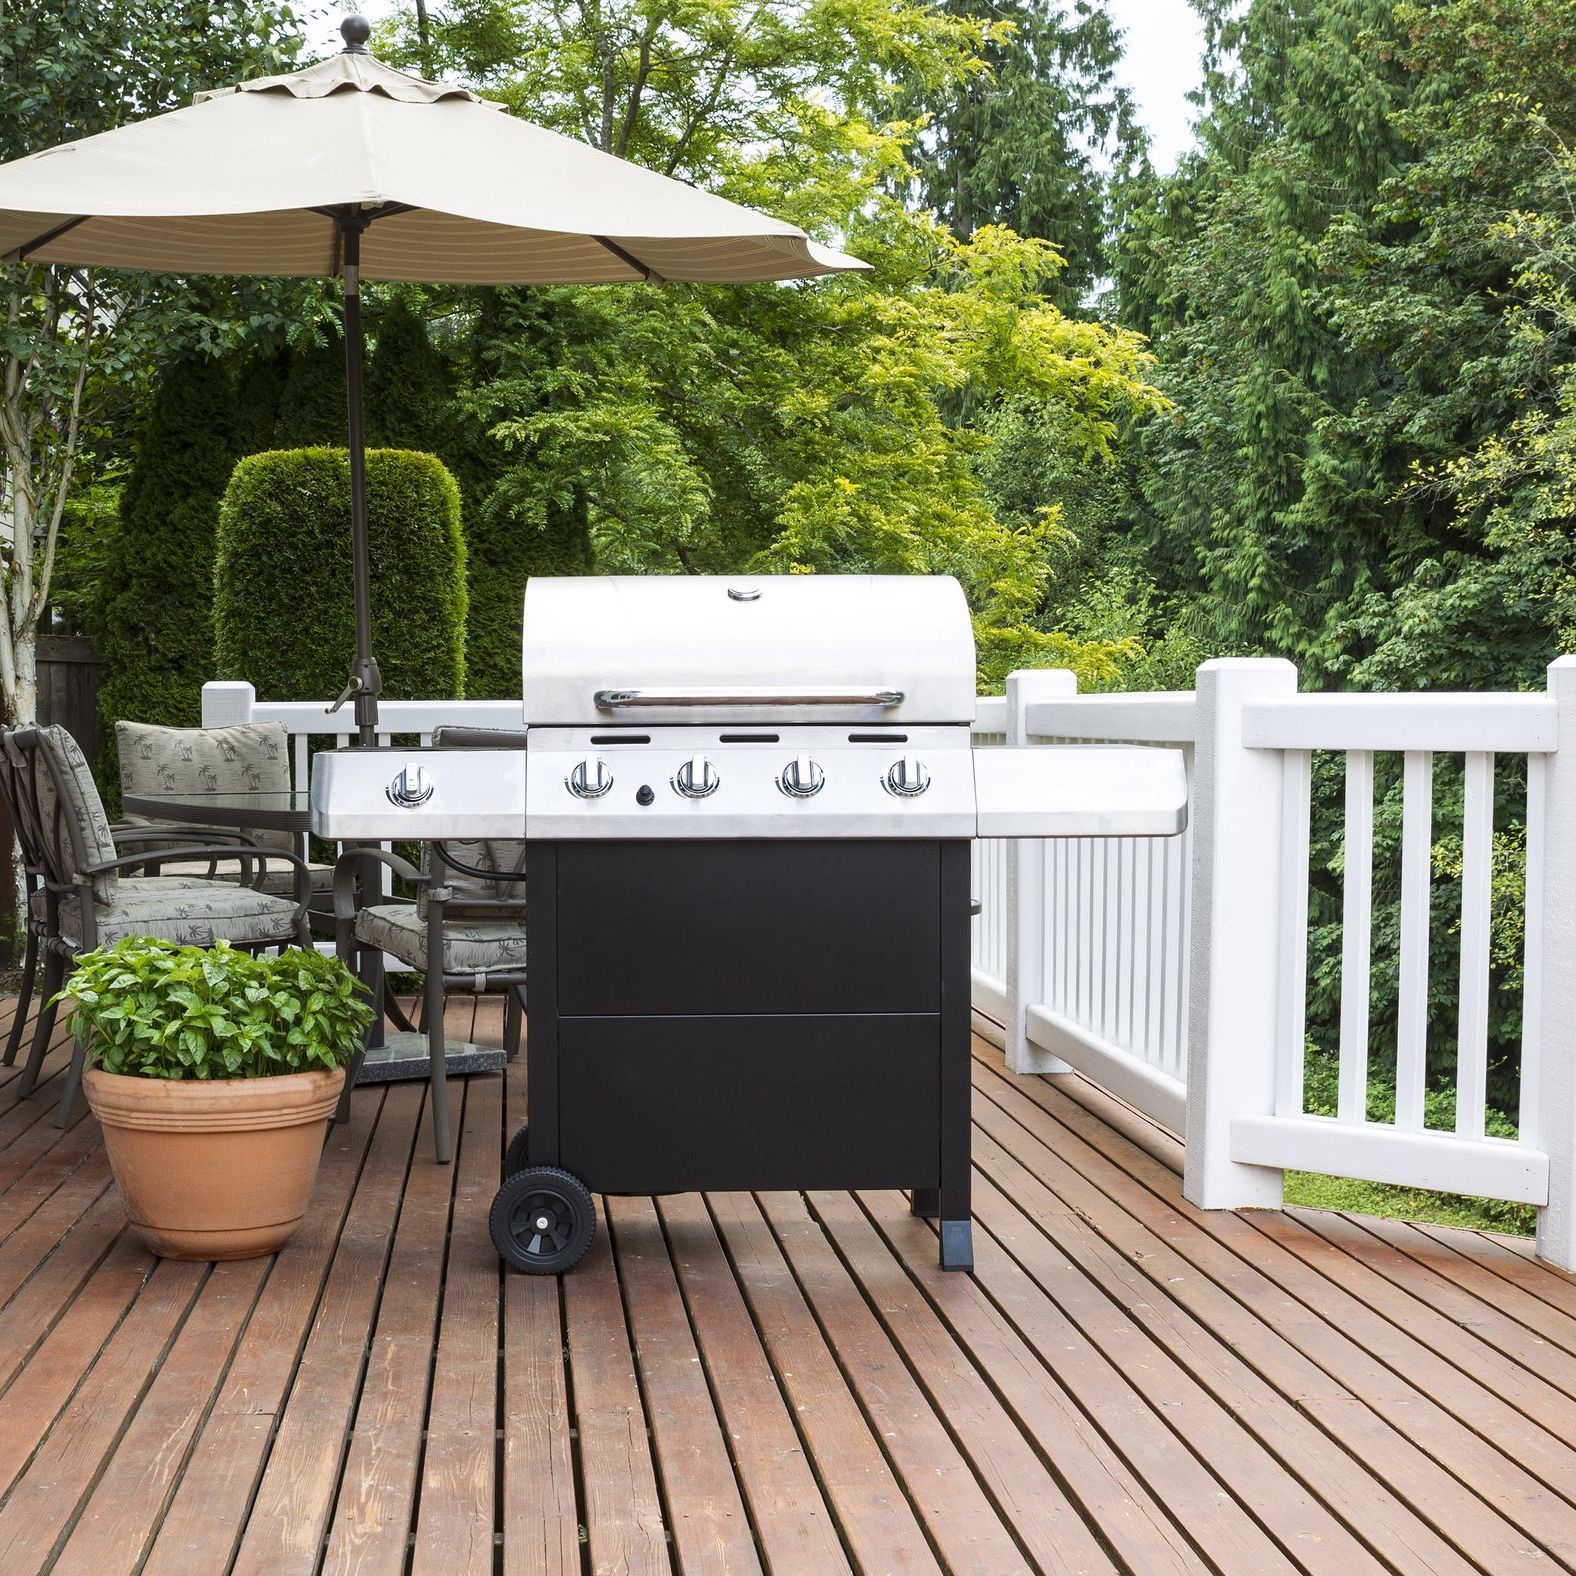 a grill is sitting on a wooden deck under an umbrella